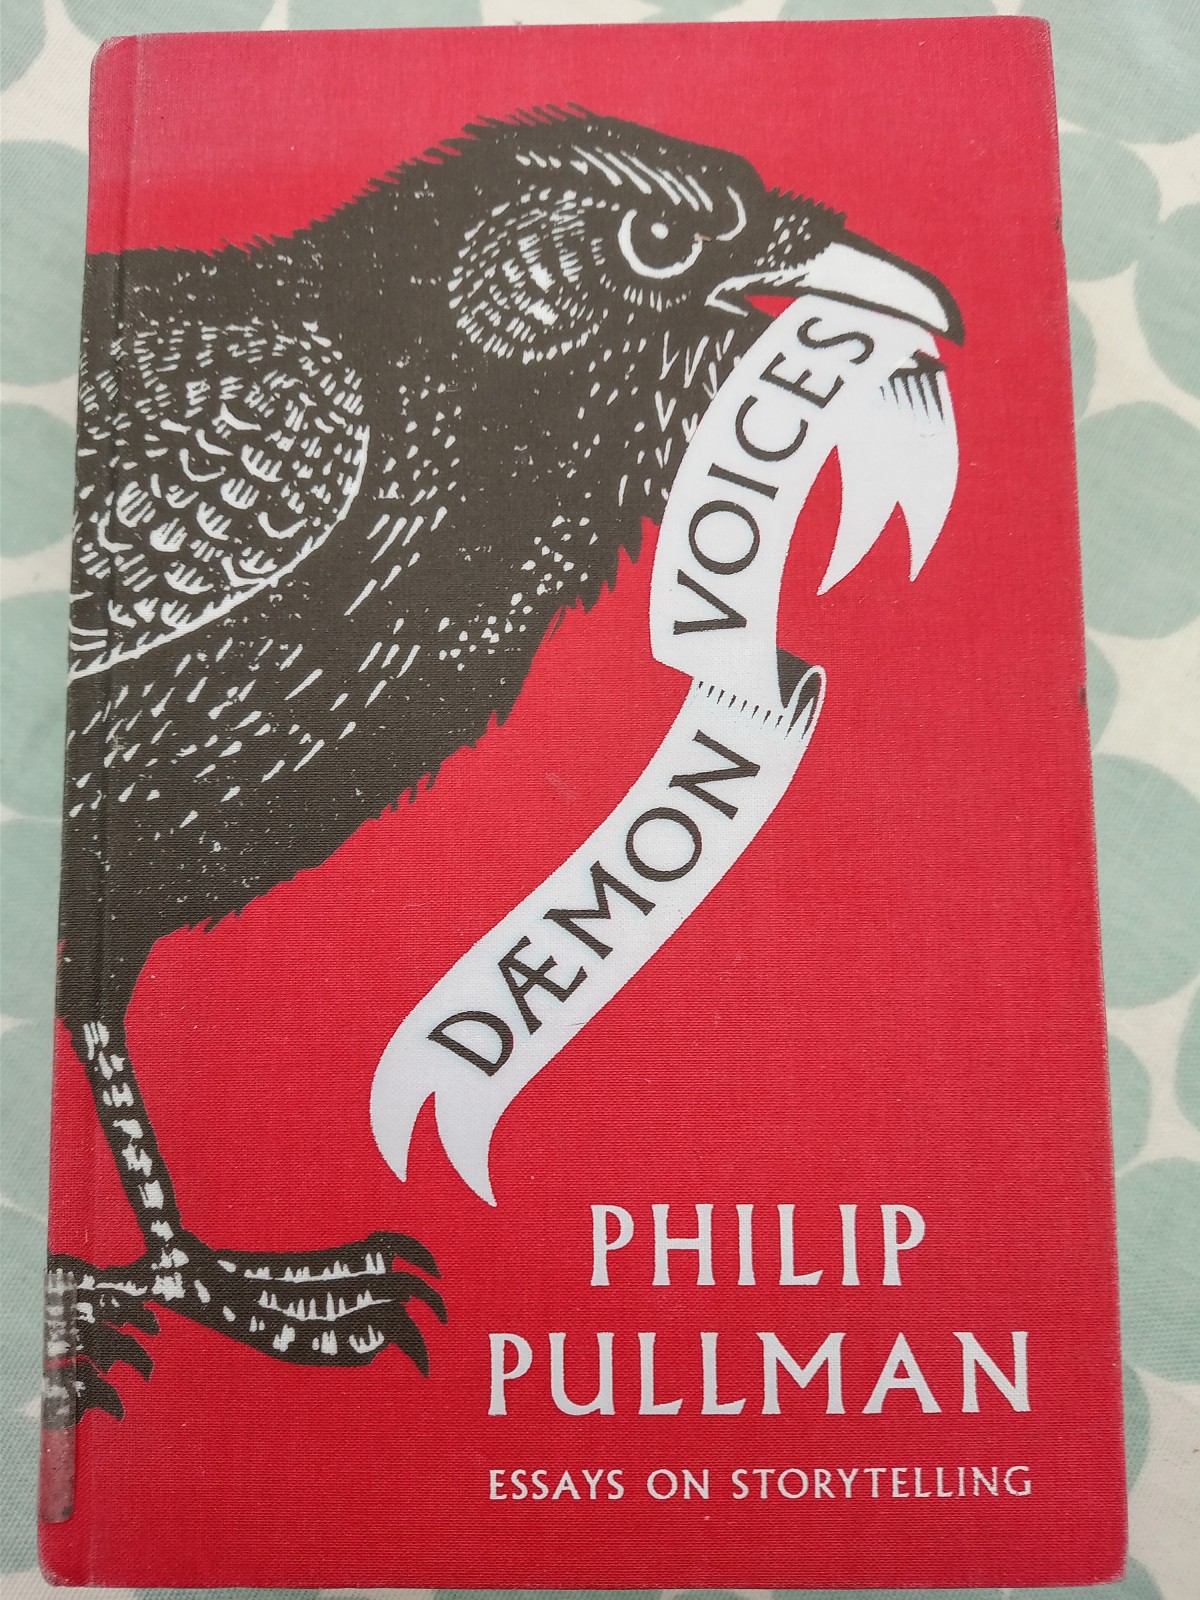 What does Philip Pullman say about writing fiction? Daemon Voices Philip Pullman